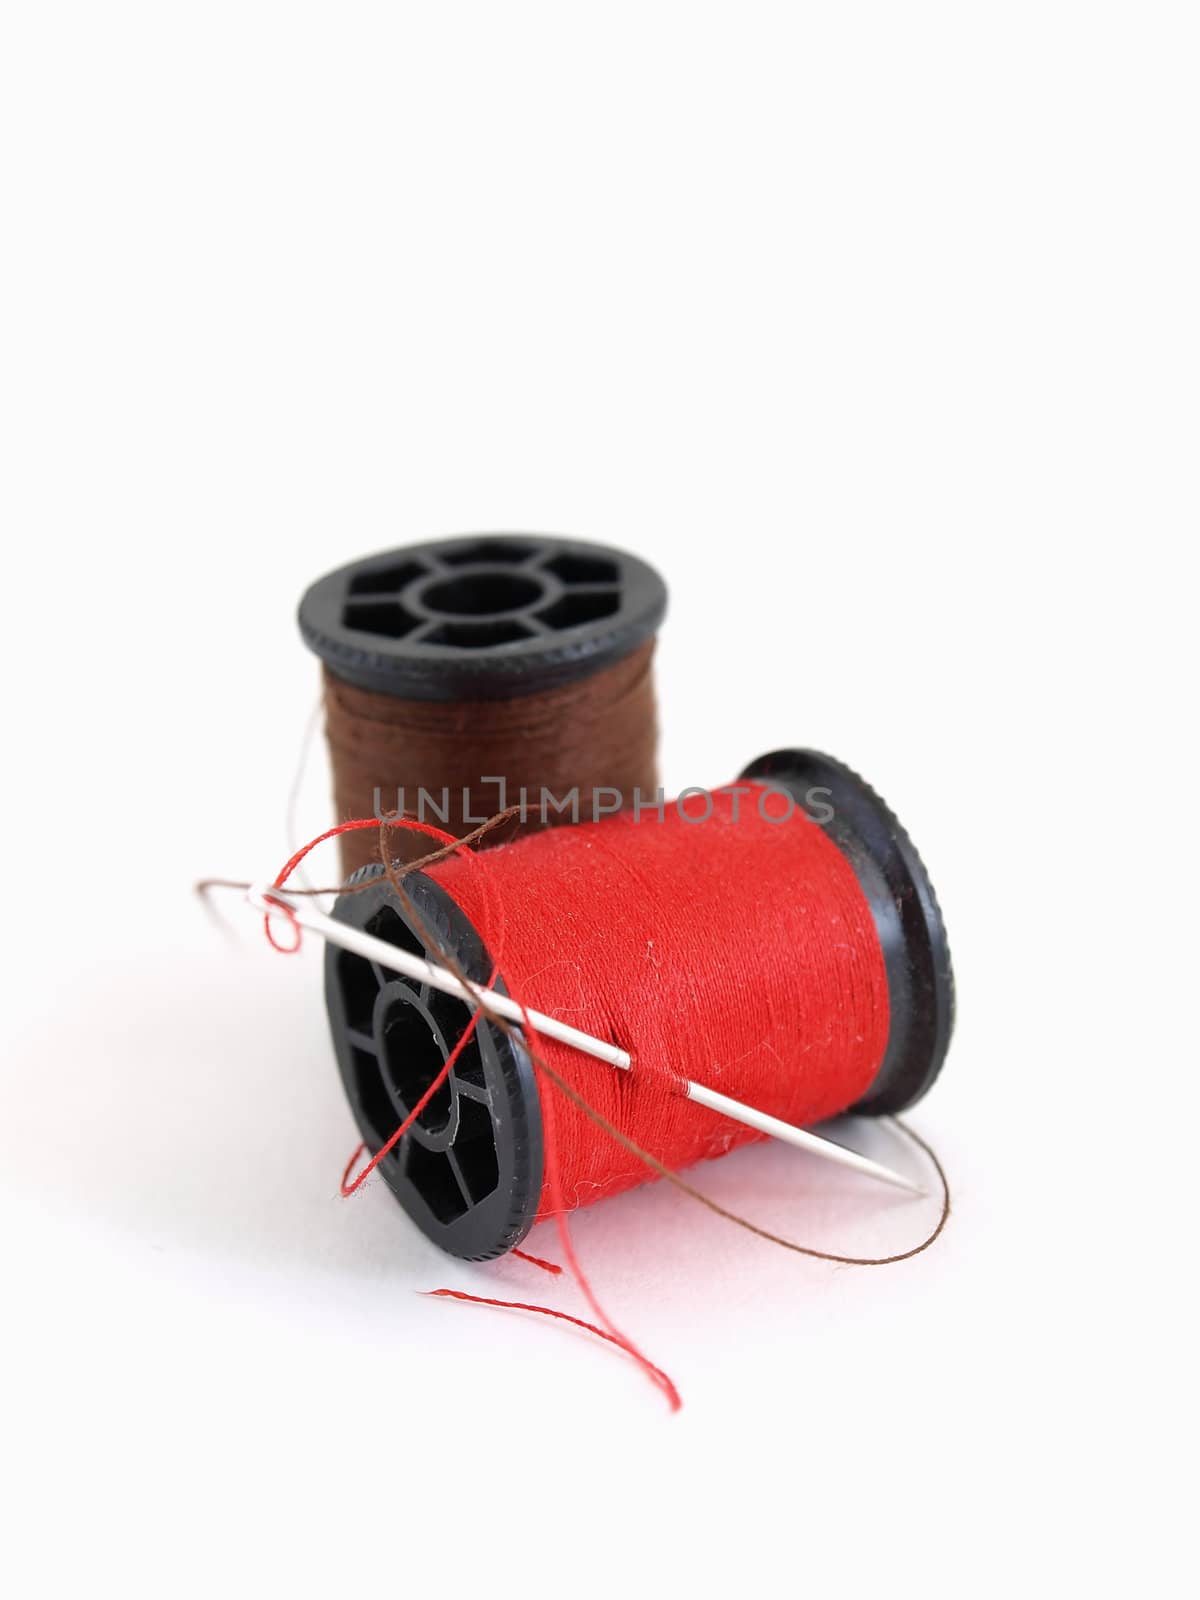 Two spools of thread and a needle, isolated on a white background.